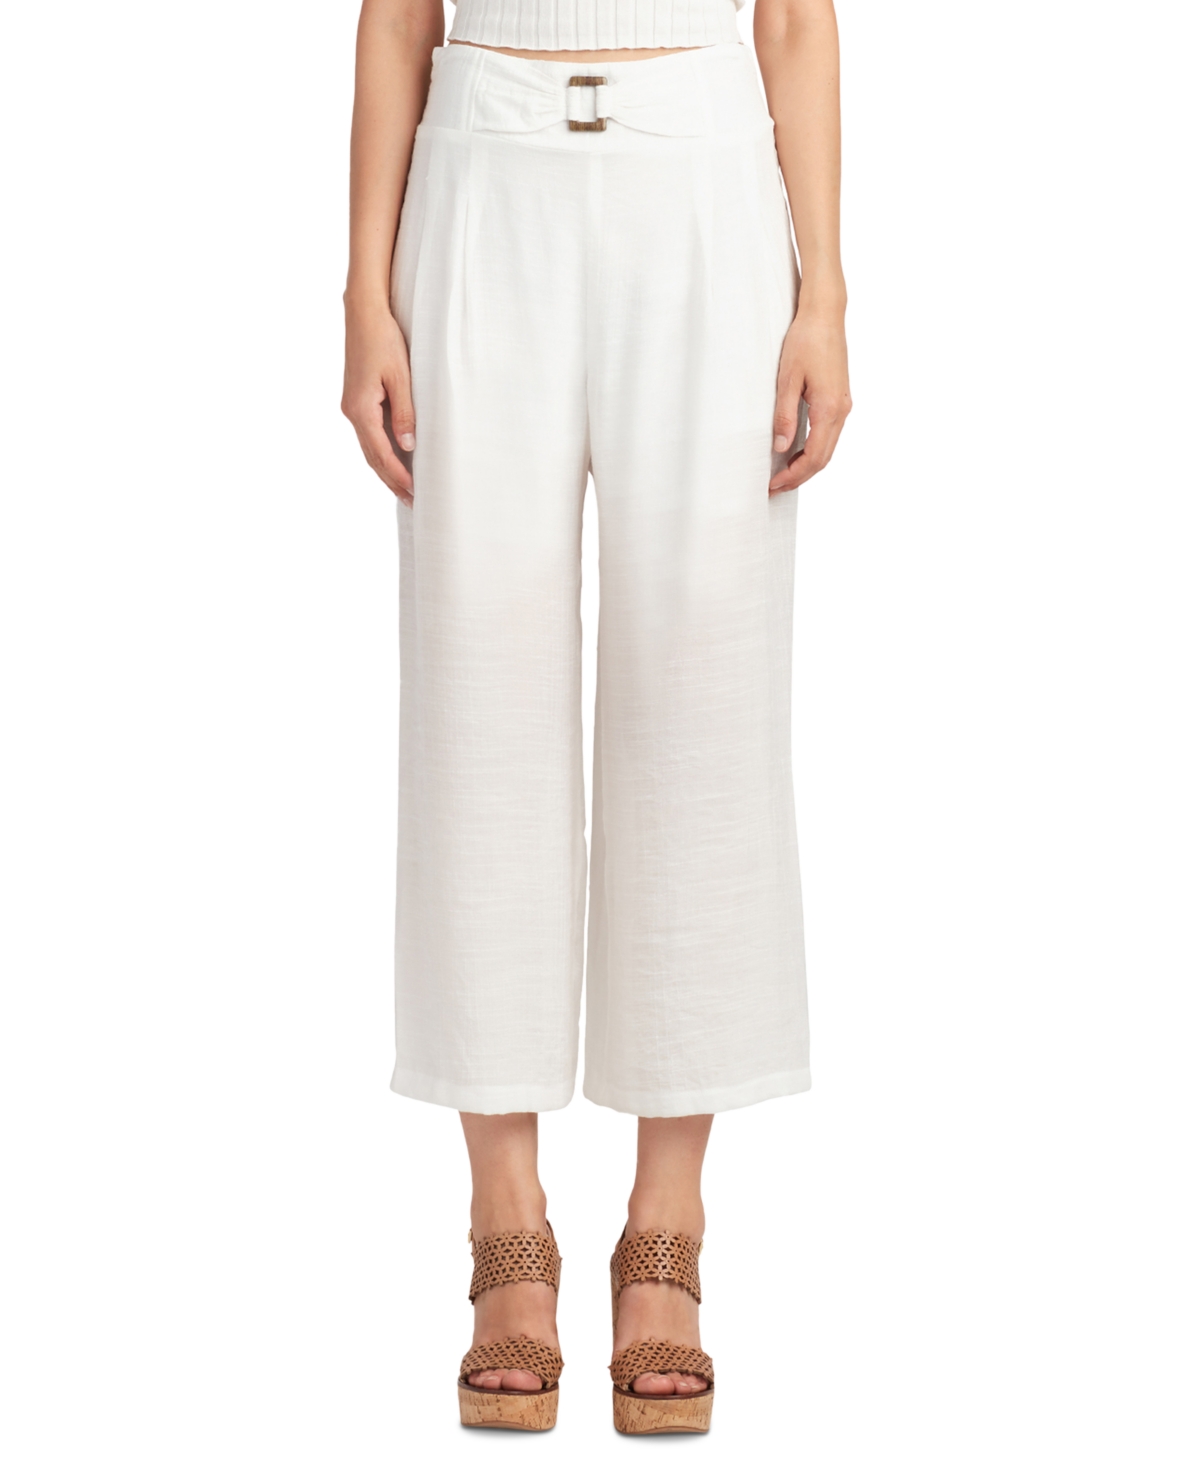 Juniors' Mid-Rise Pull-On Smocked-Back Pants - Off White